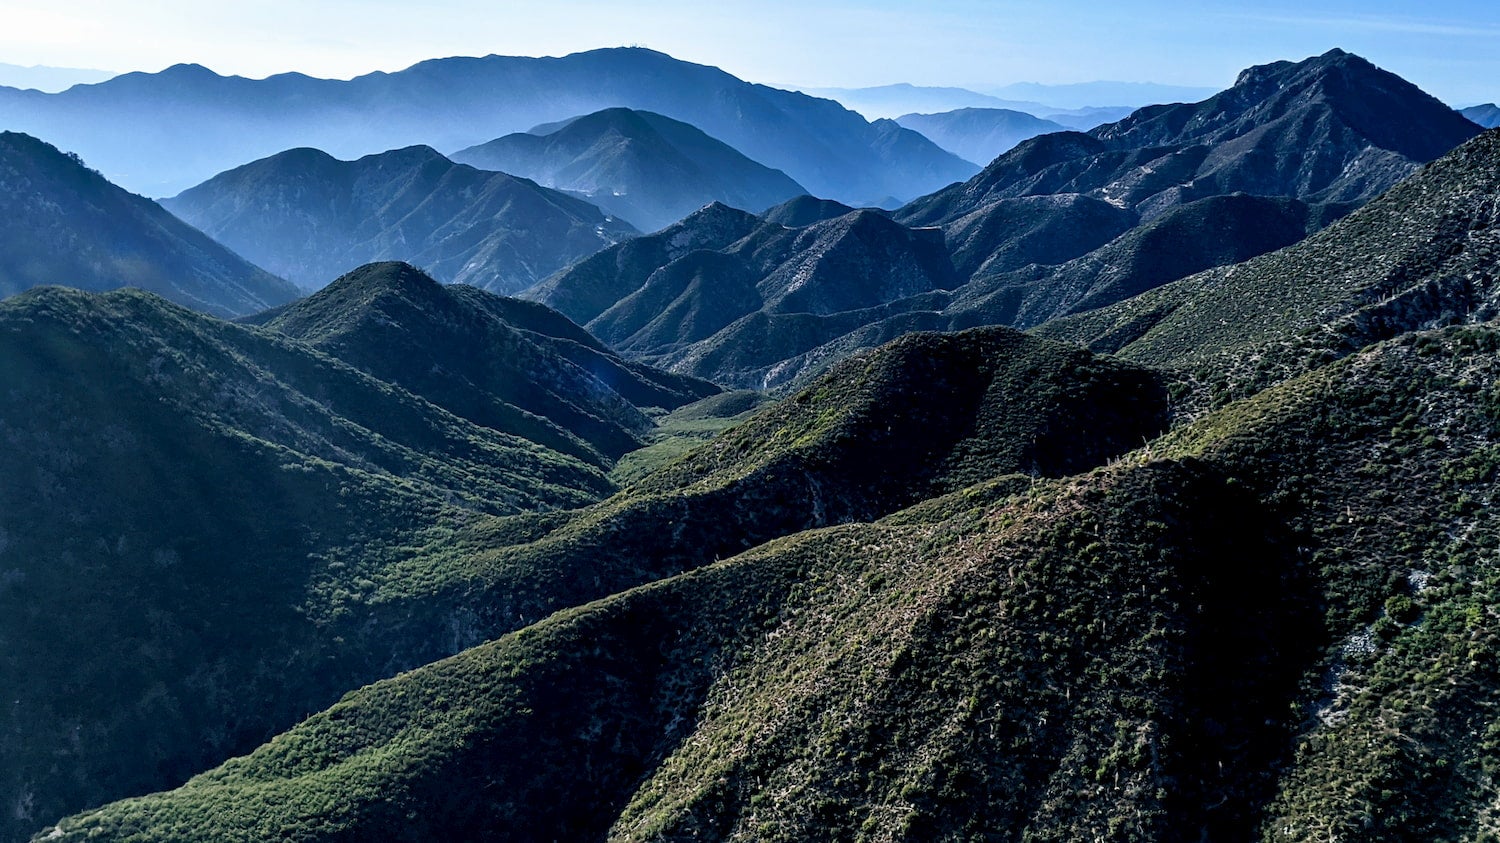 Landscape of tree dotted mountains of the Angeles National Forest.